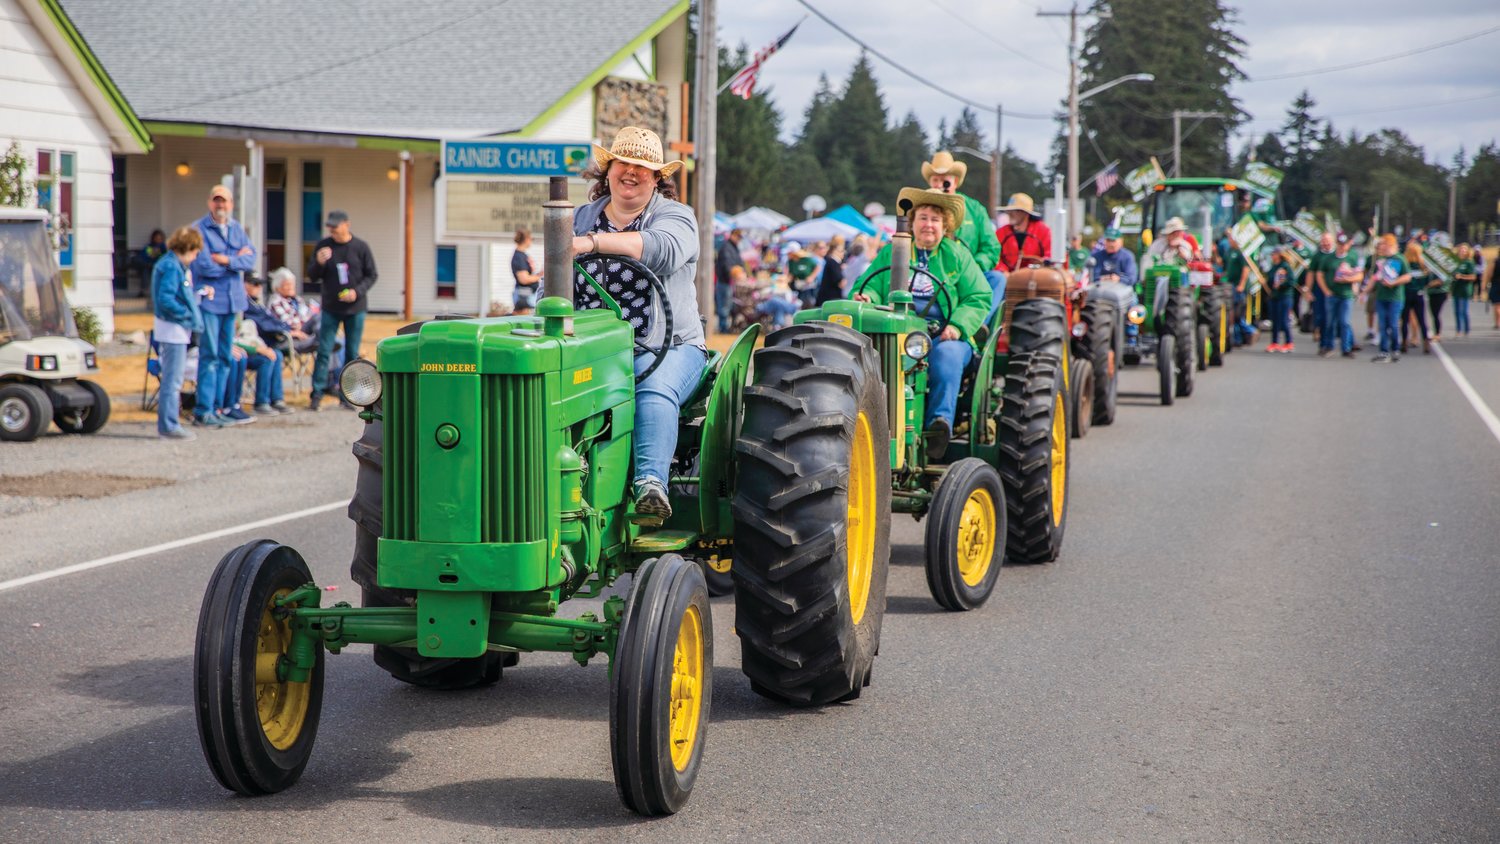 John Deere tractors line state Route 507 on Saturday during the Rainier Round Up Days parade.